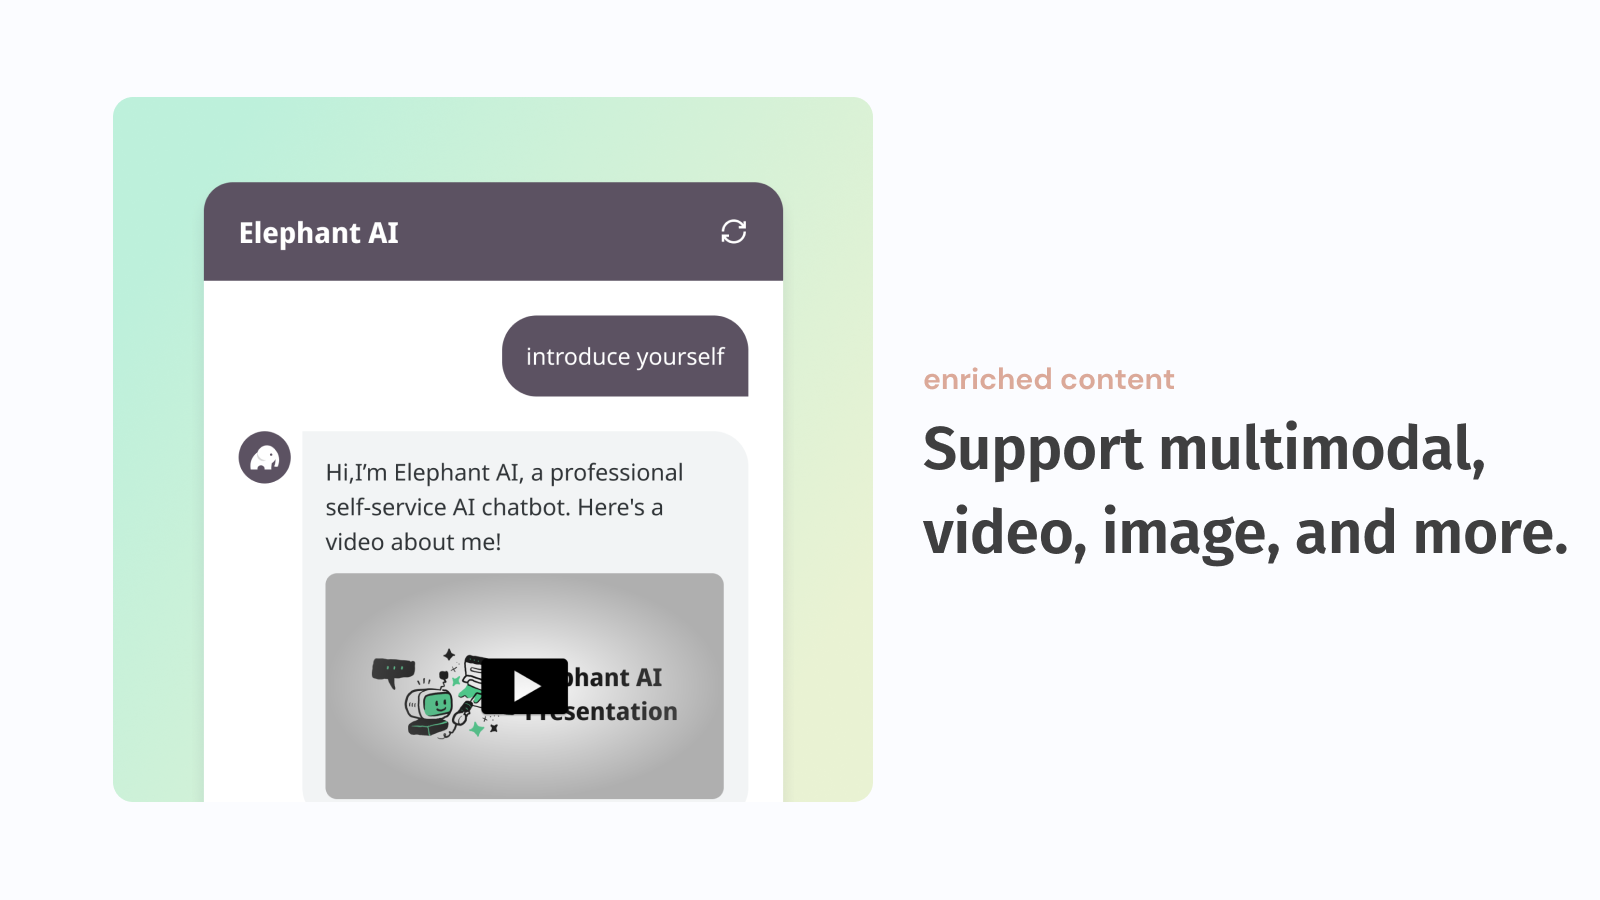 Support multimodal, video, image, and more.